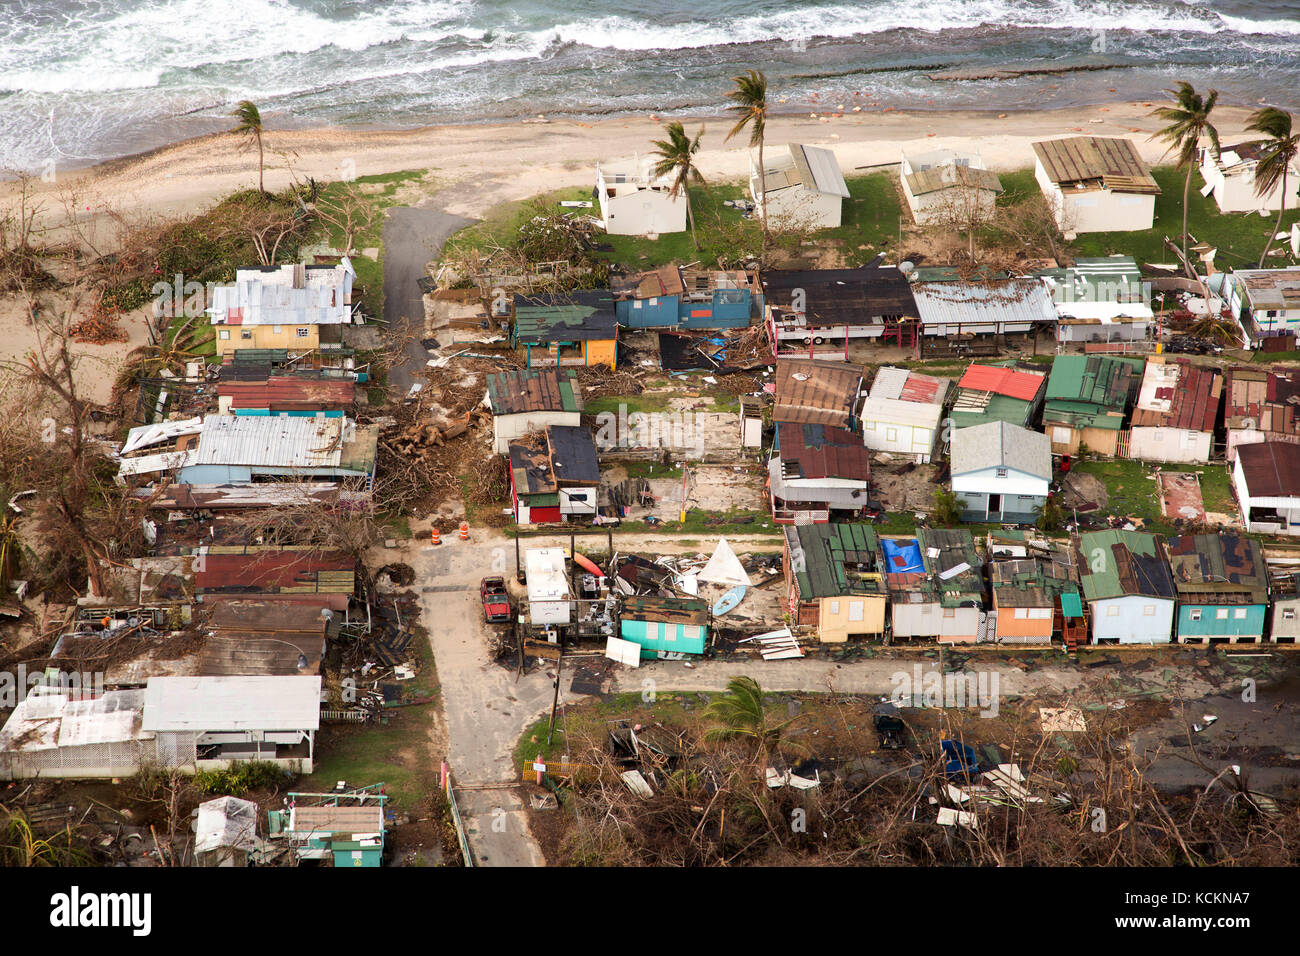 An aerial view of the damage left behind after Hurricane Maria in Puerto Rico Stock Photo